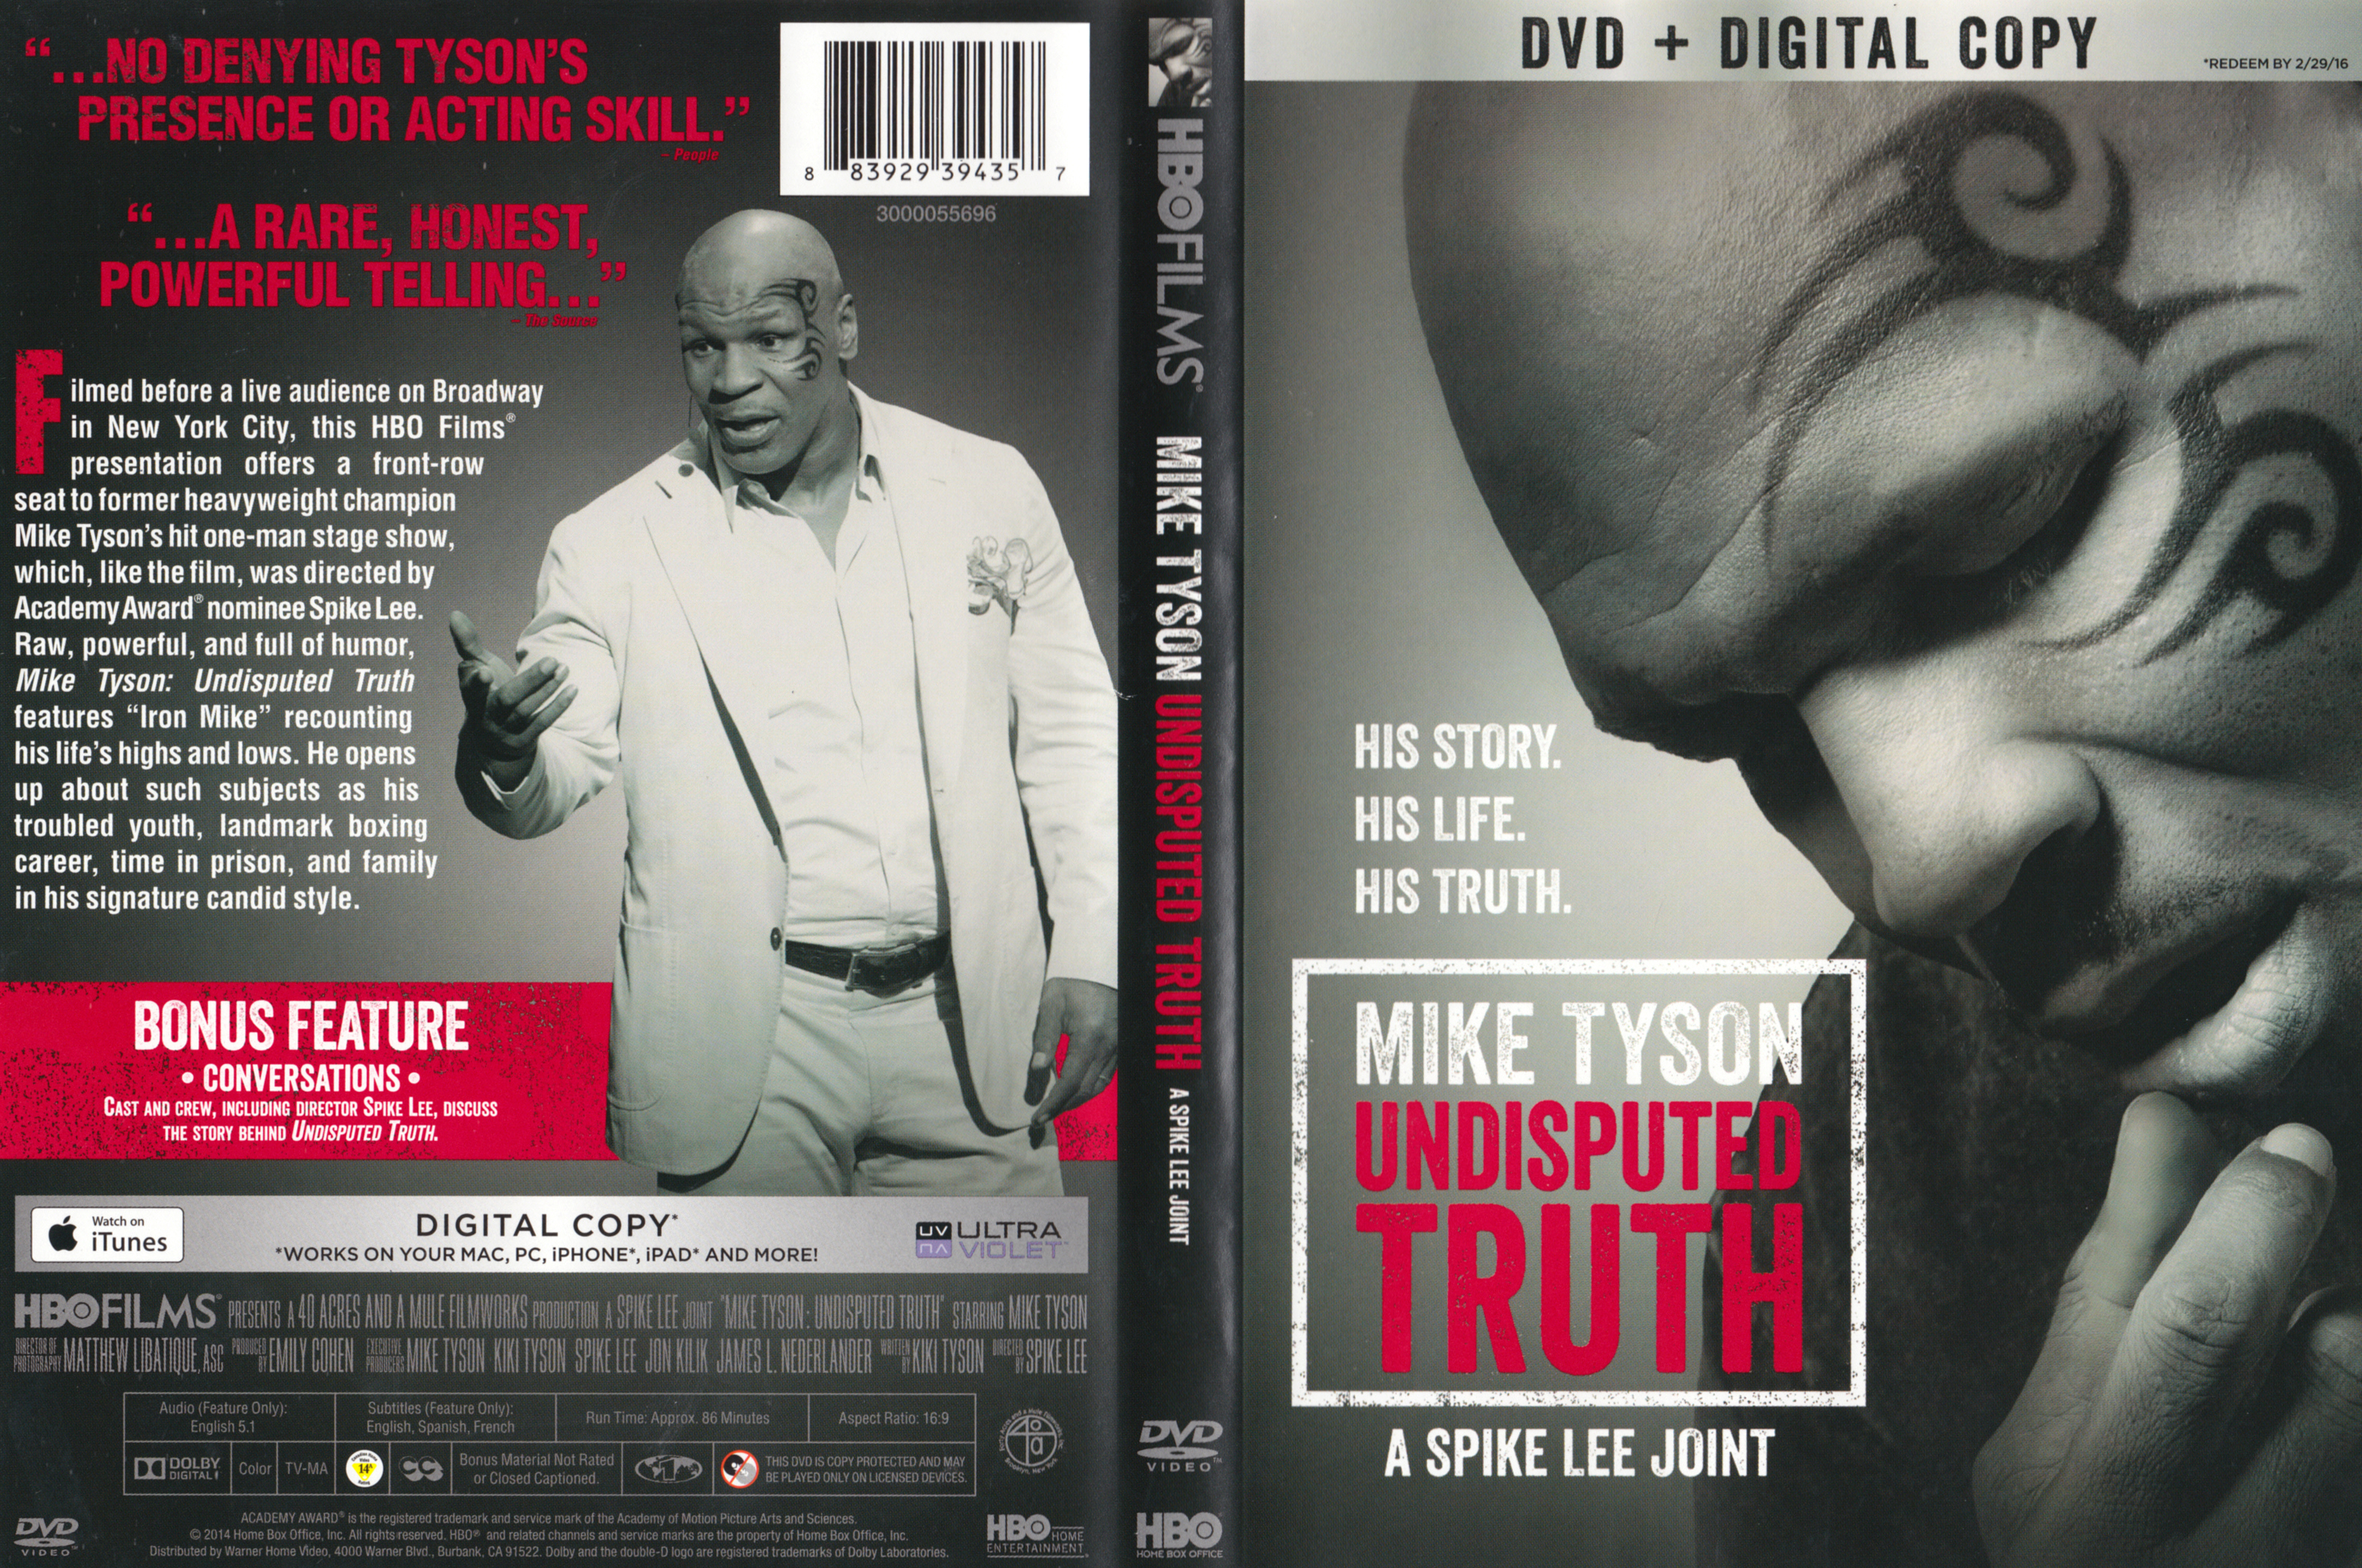 Jaquette DVD Mike Tyson Undisputed Truth Zone 1